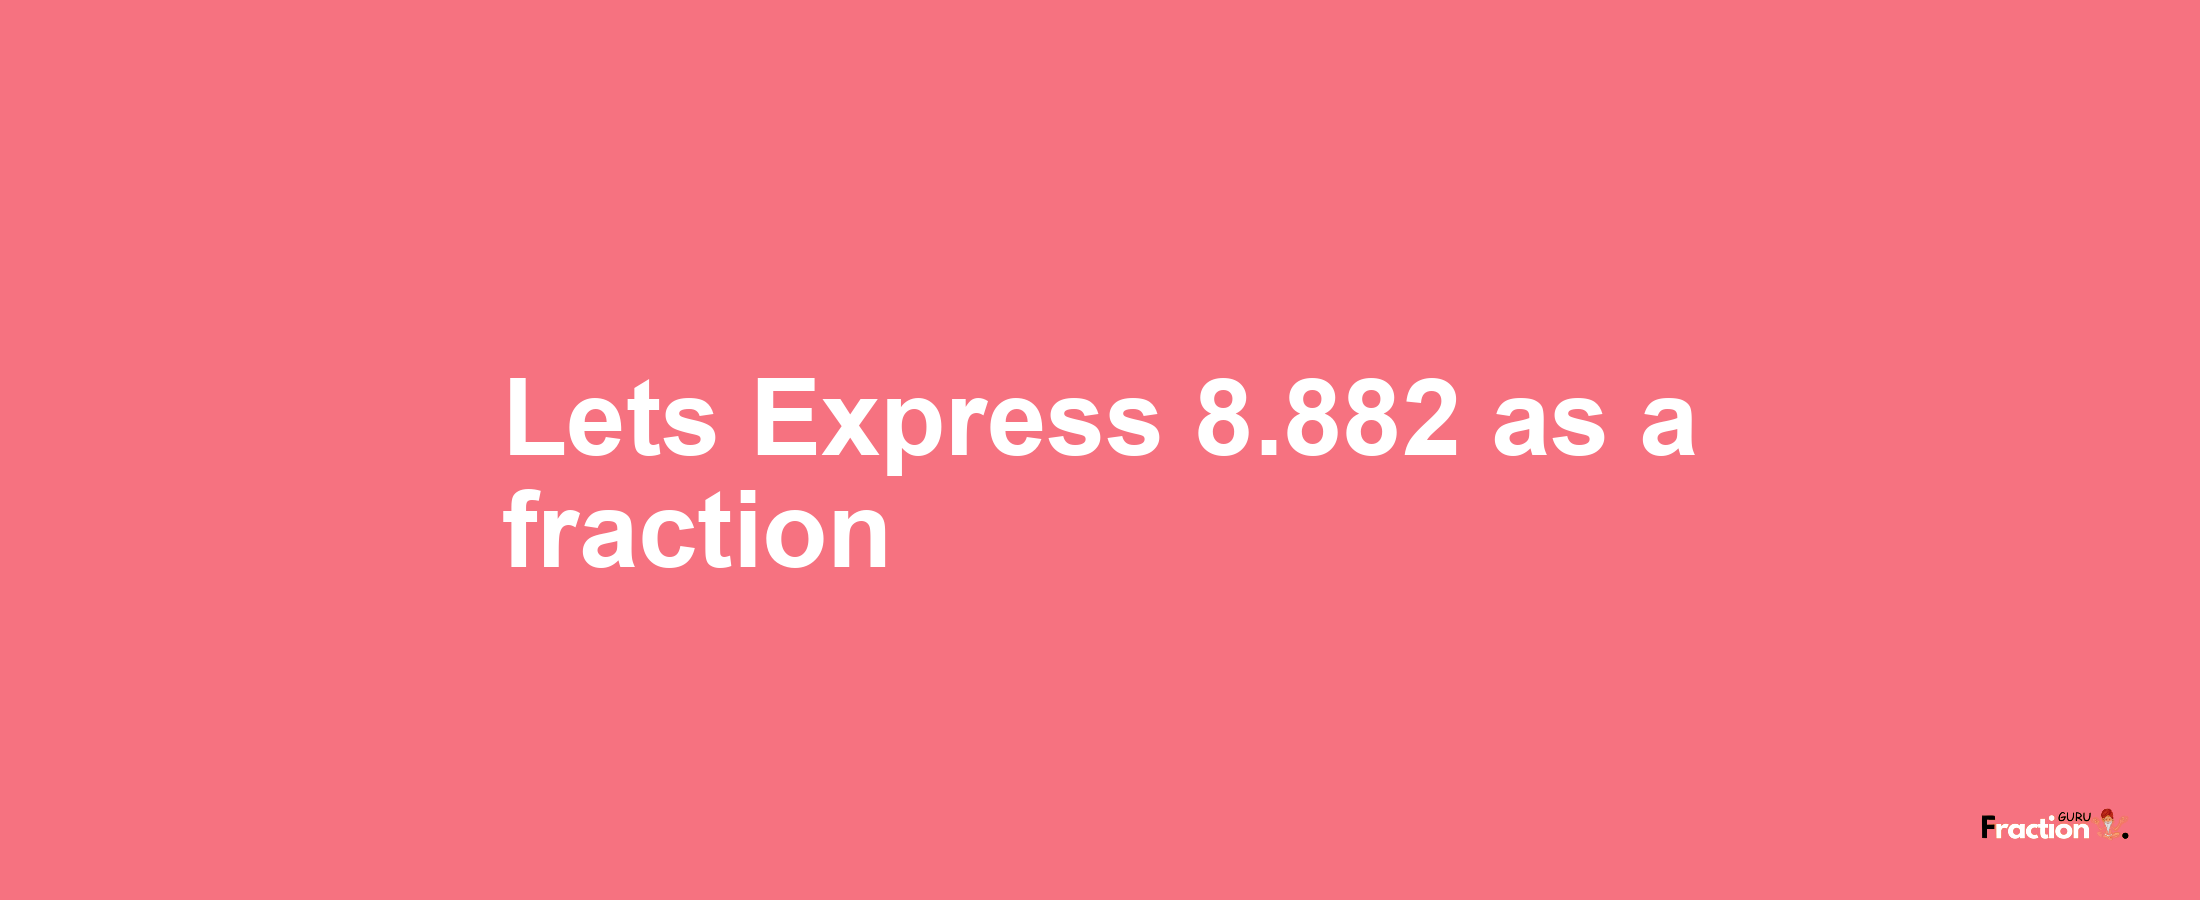 Lets Express 8.882 as afraction